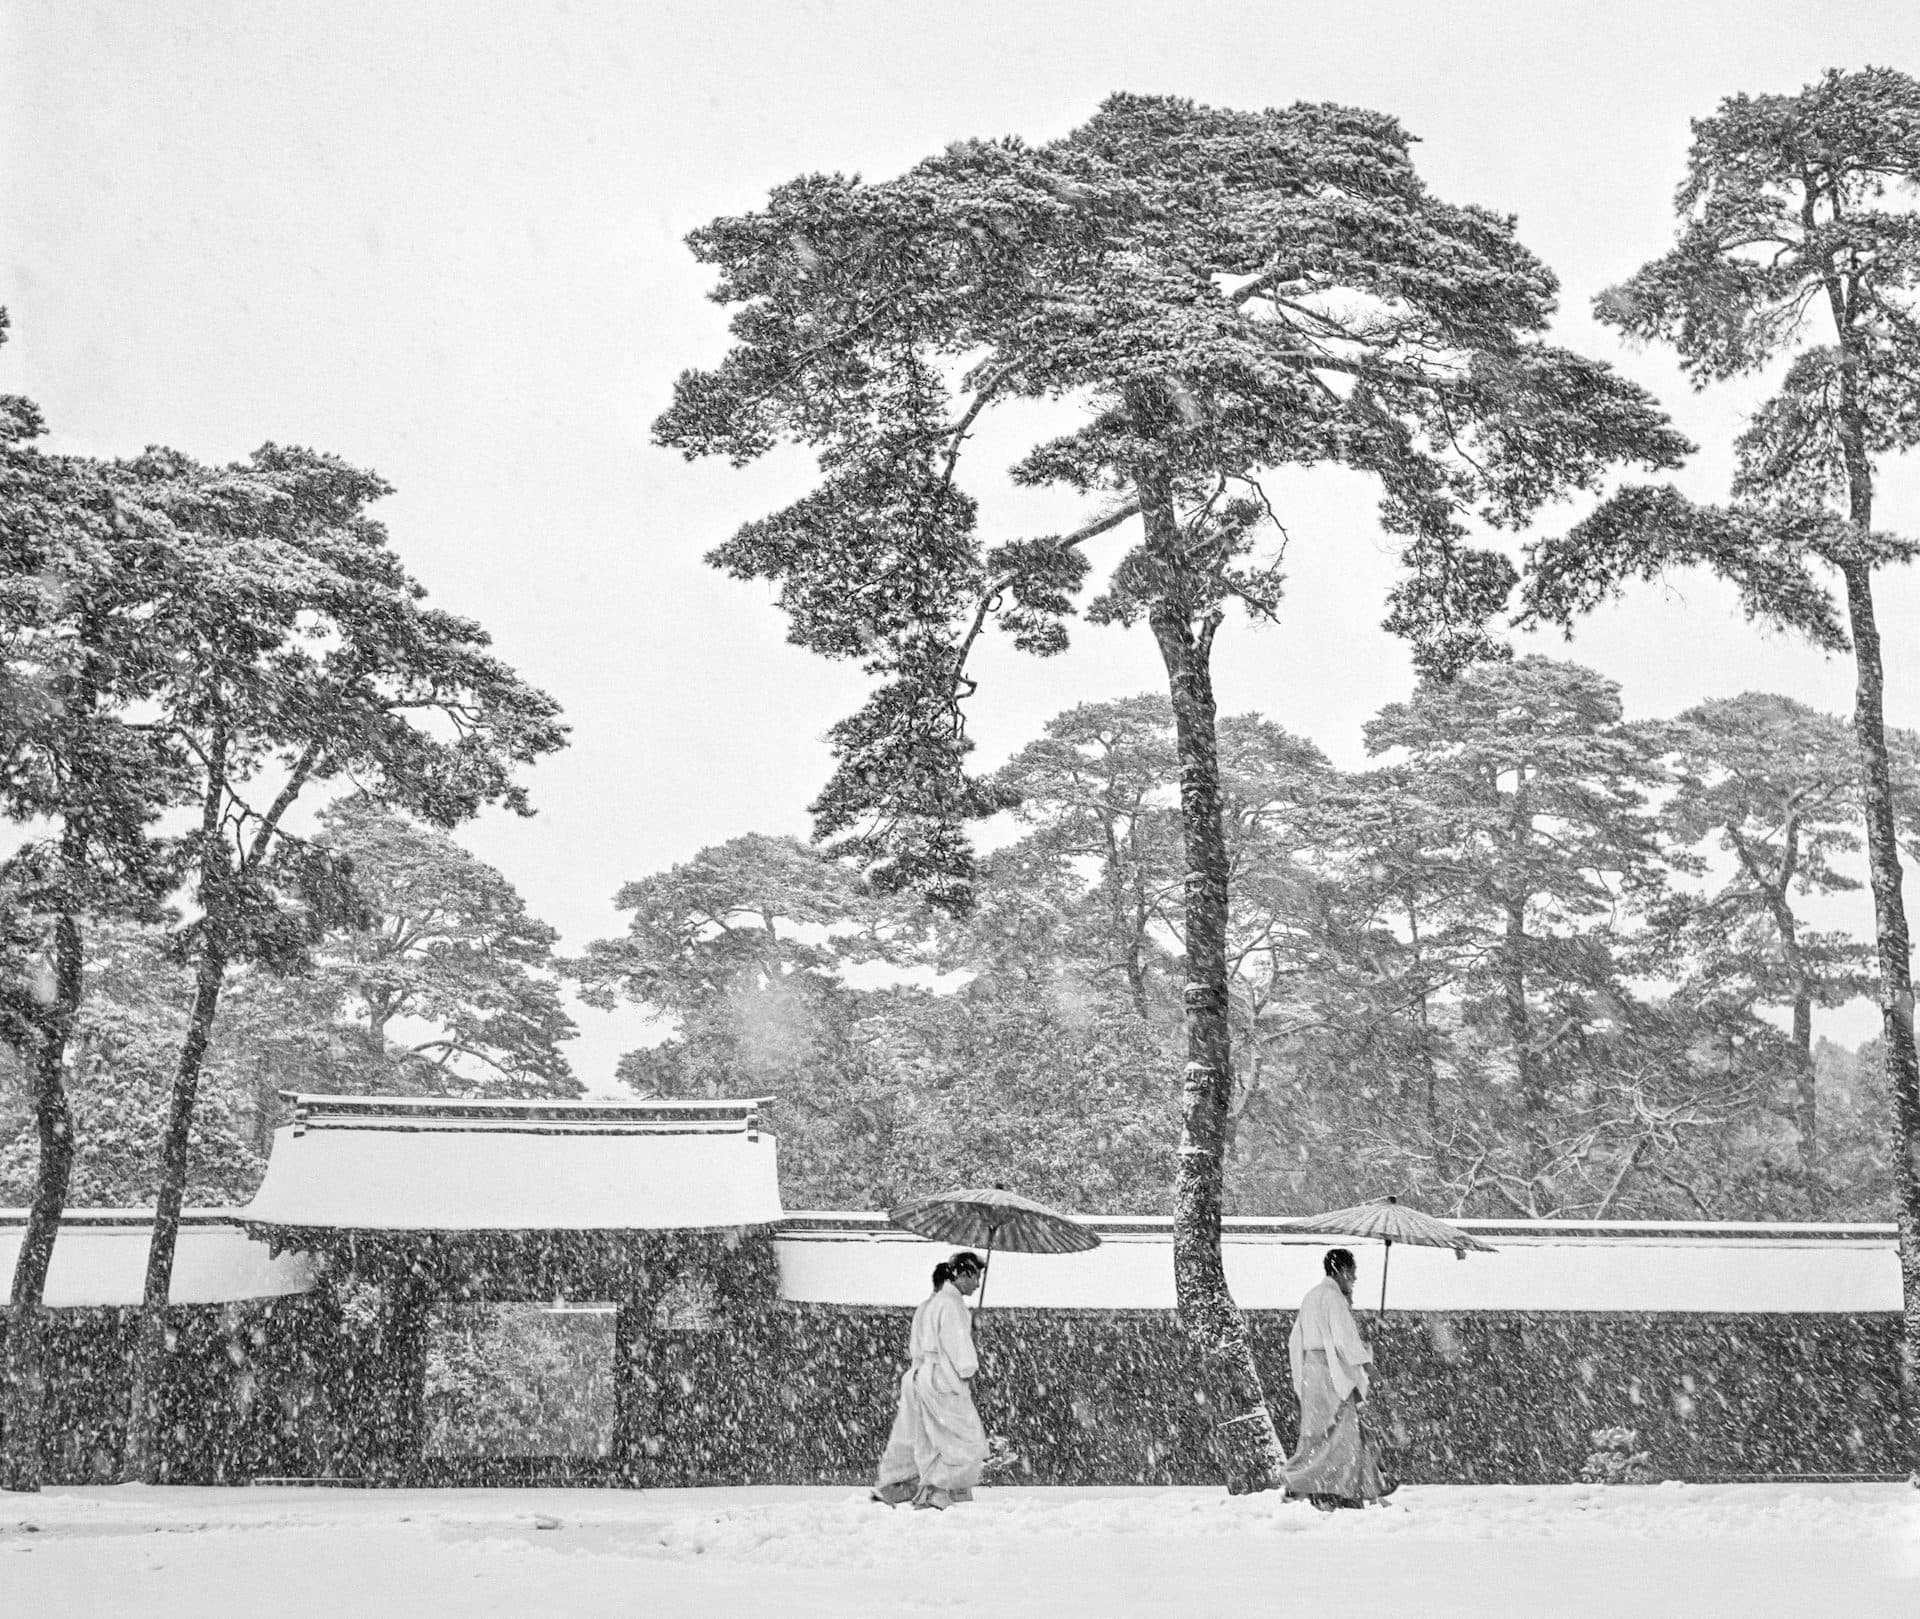 Snow-draped trees in the garden of the Meiji shrine, Tokyo. Three persons carrying umbrellas walk through the snow wearing white robes.